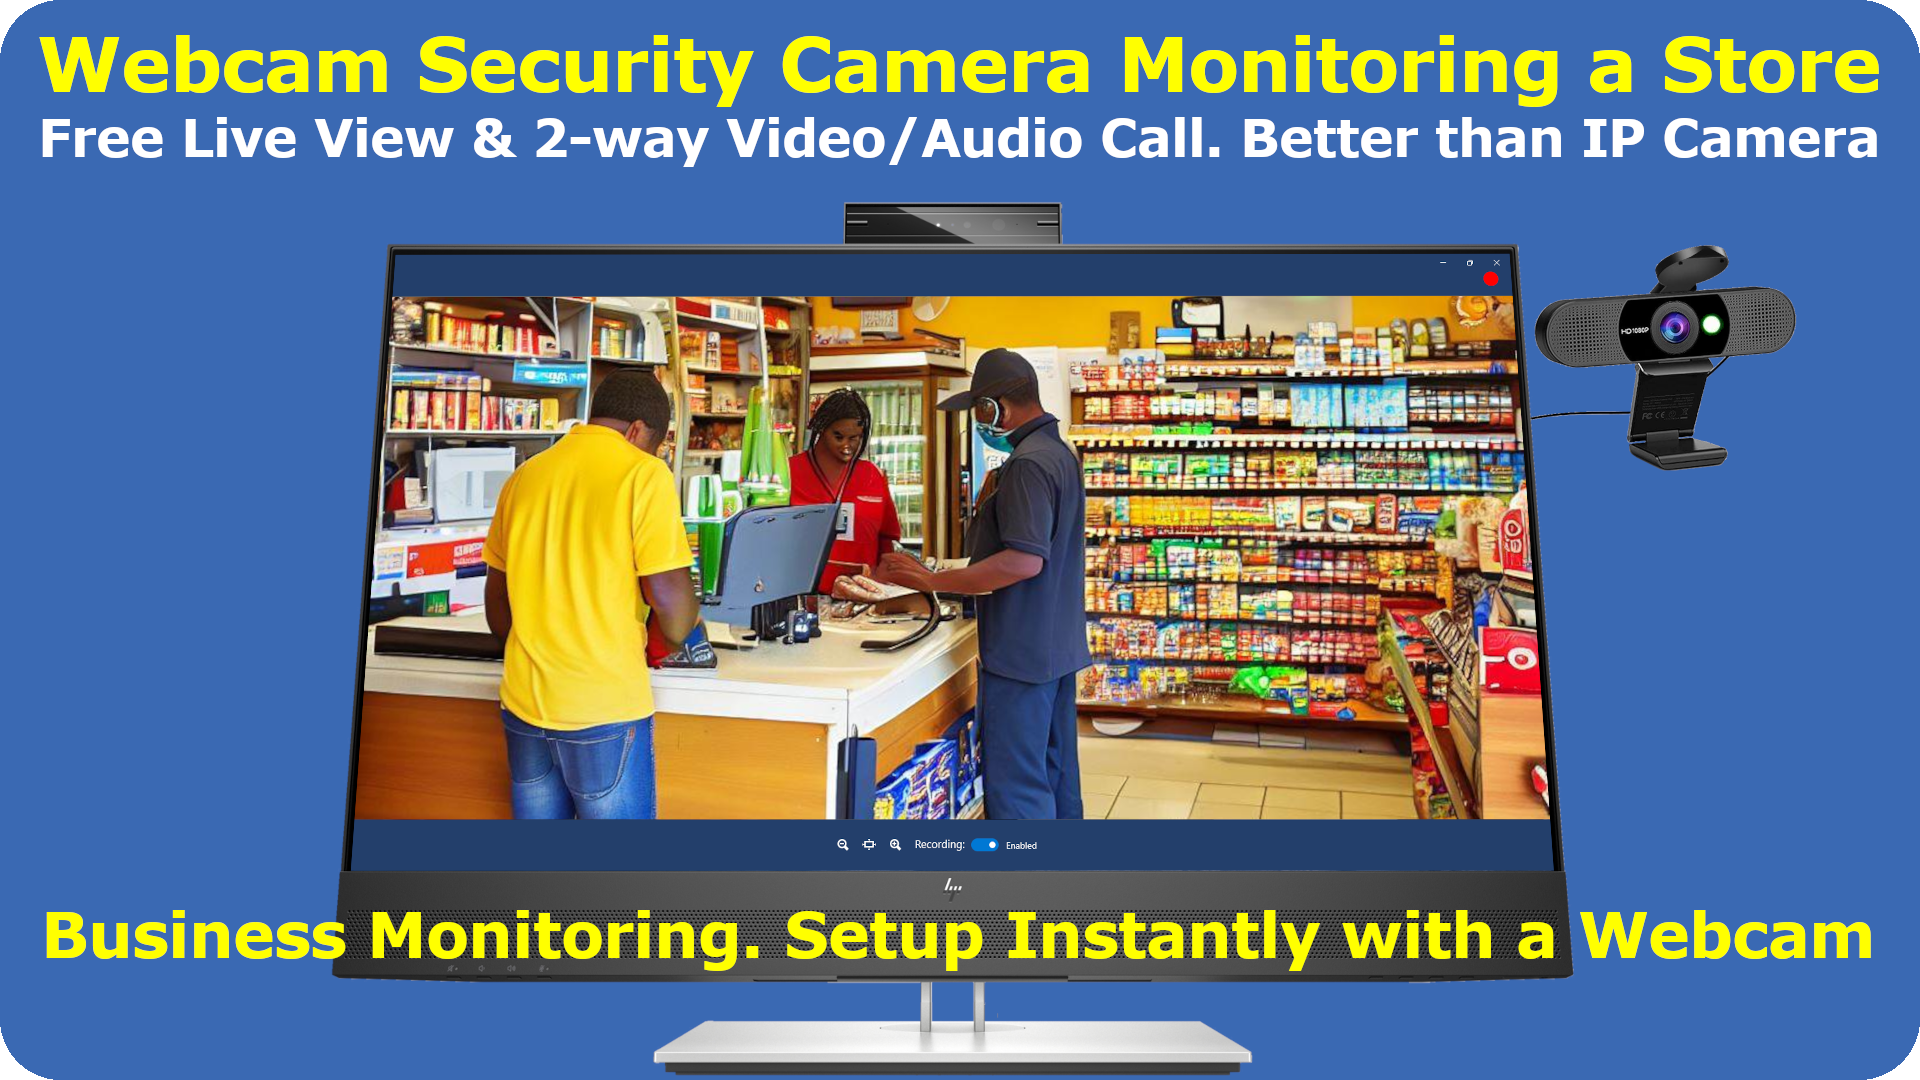 Use Webcam Security Camera to monitor a store. Free live view and 2-way video/audio call. Better than IP cameras. Business Monitoring Setup instantly.